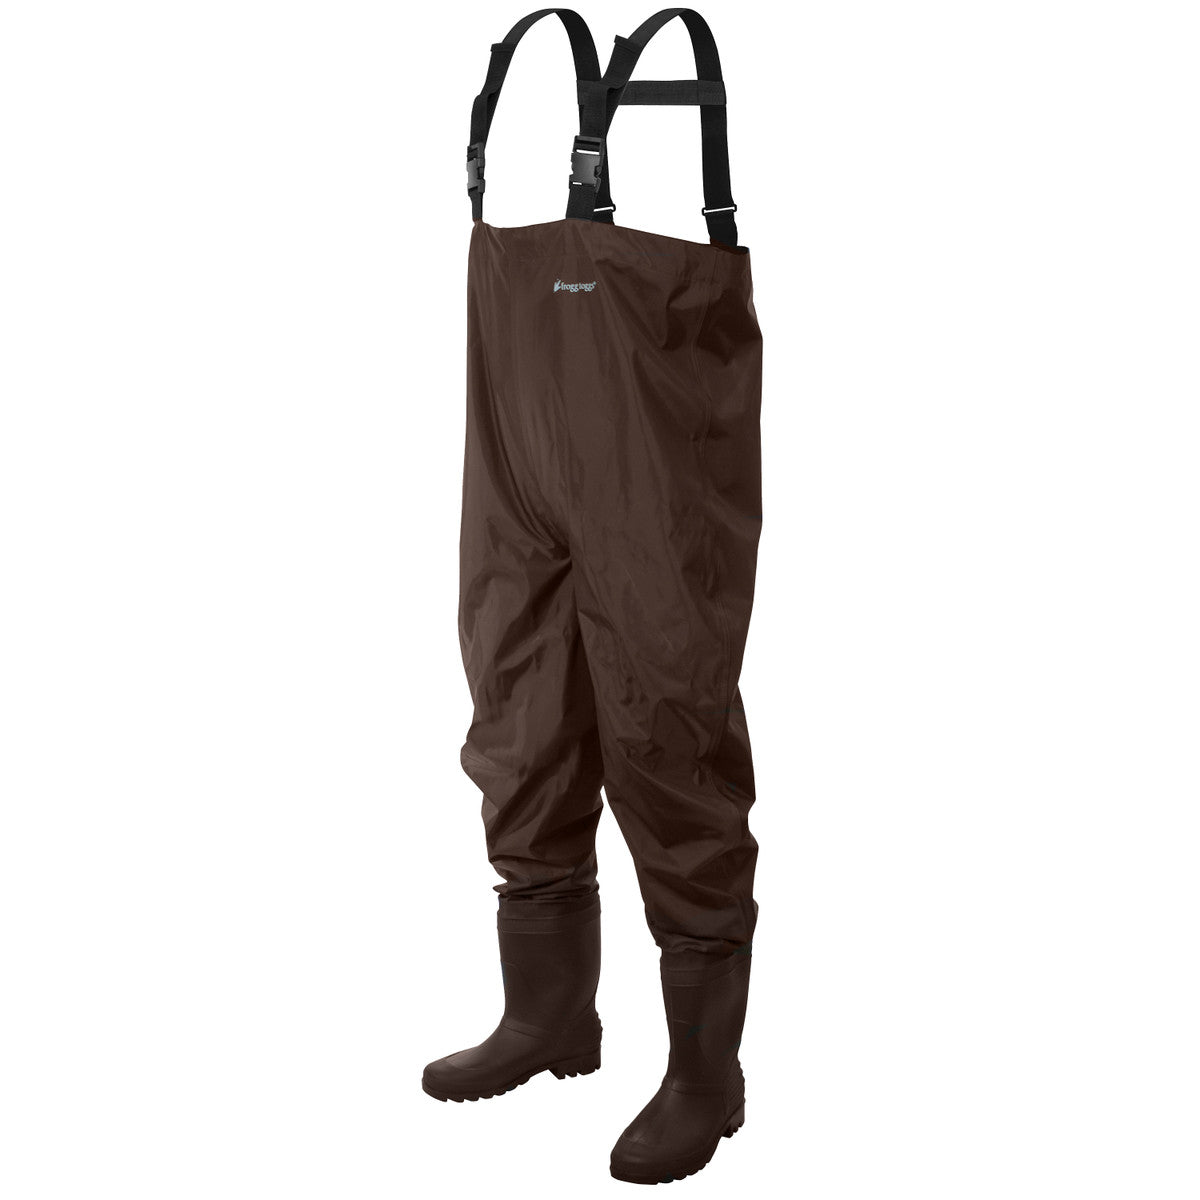 FROGG TOGGS MEN'S RANA PVC LUG CHEST WADER BROWN SIZE 10